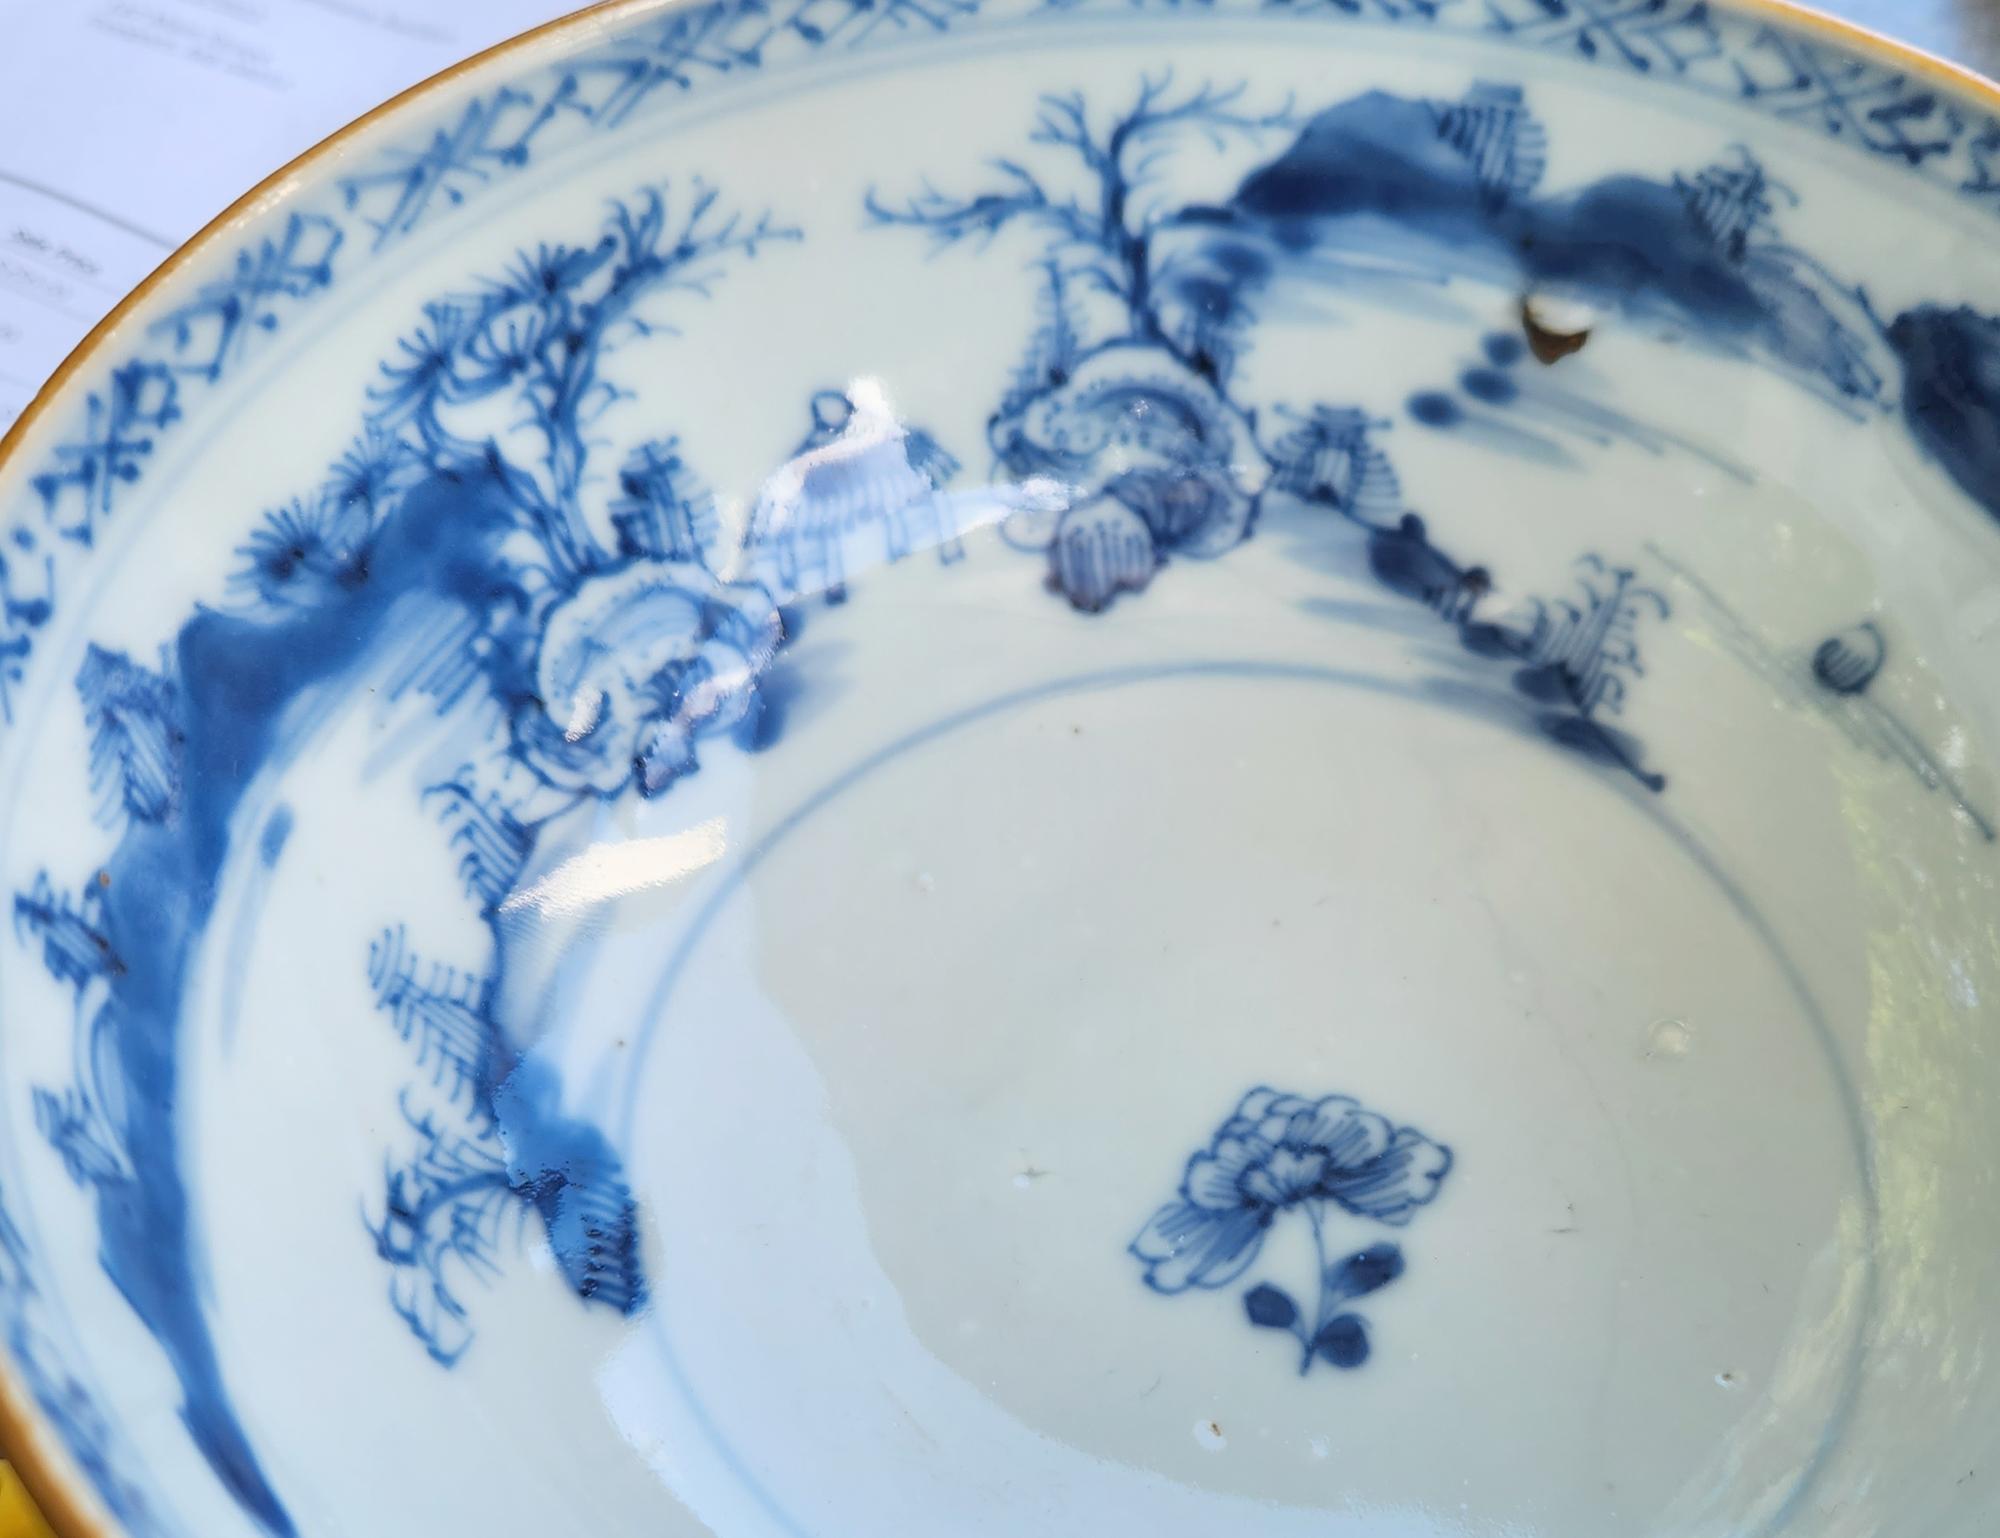 18th Century Chinese Export Porcelain Batavia-Ware Bowl and Blue & White Interior